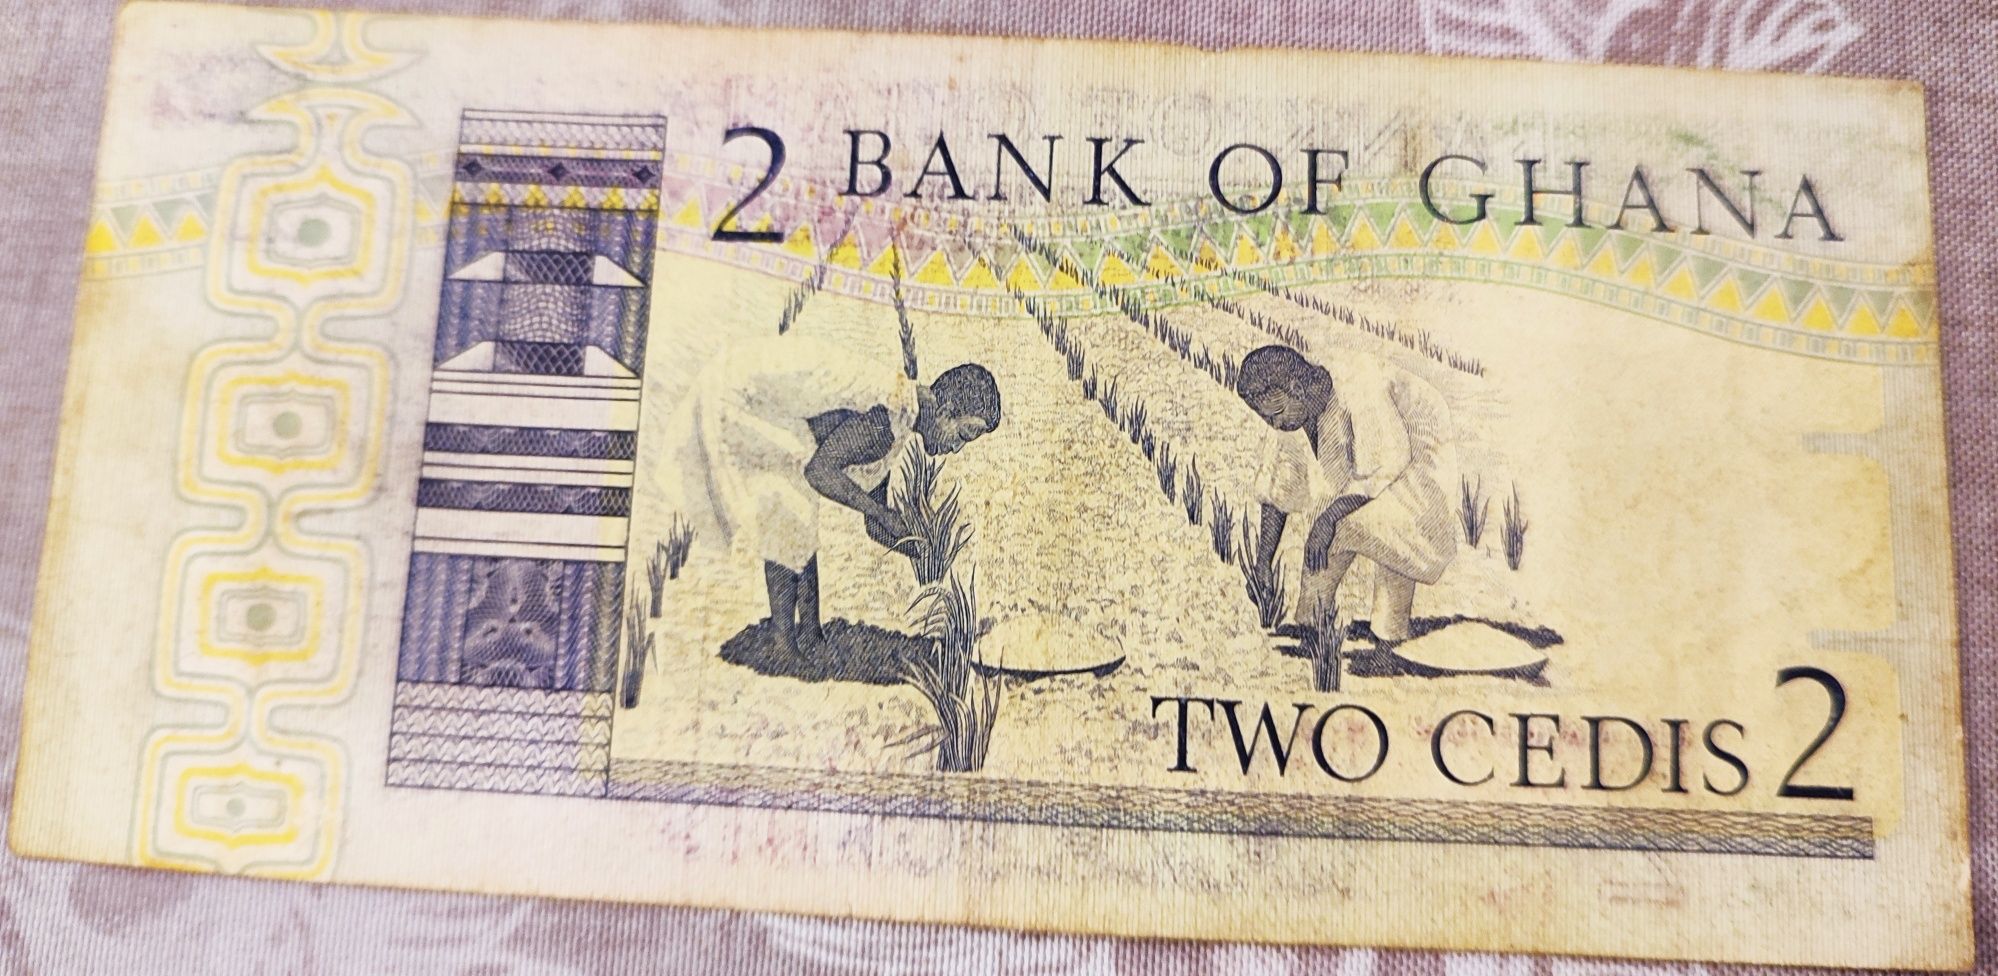 Two Cedis Bank od Ghana 6th March 1982 banknot